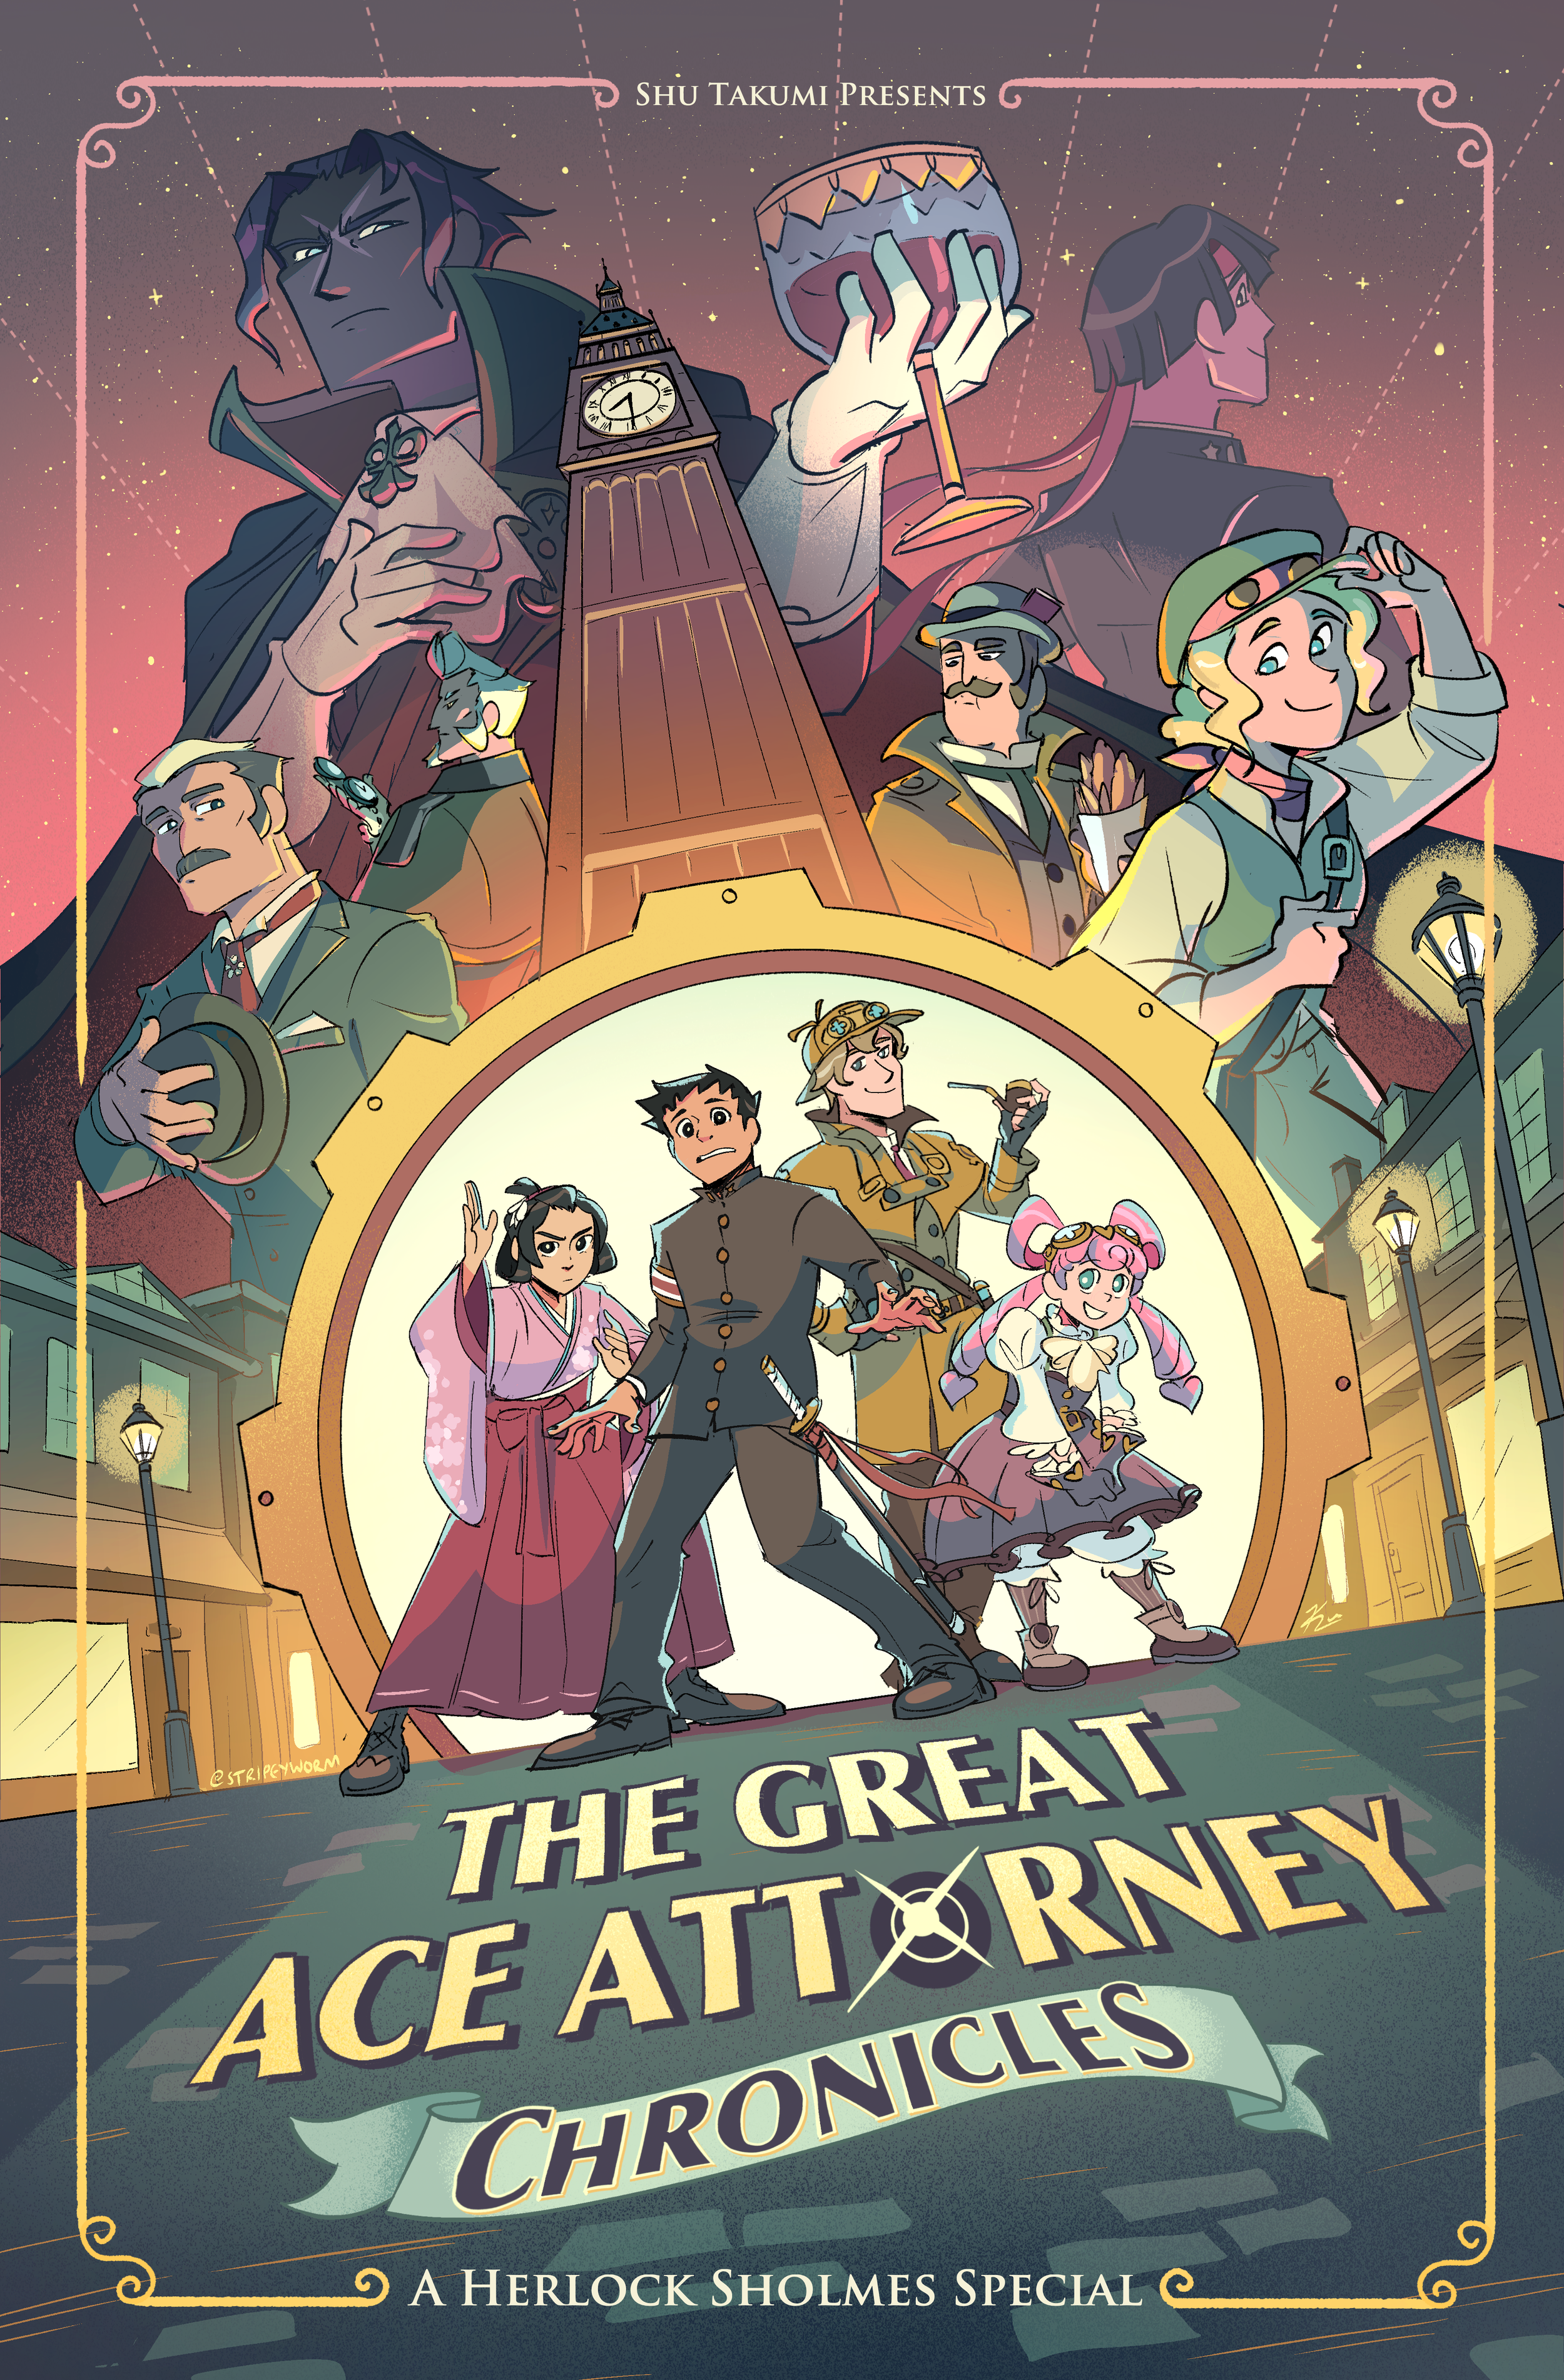 The Great Ace Attorney - Fanart Poster